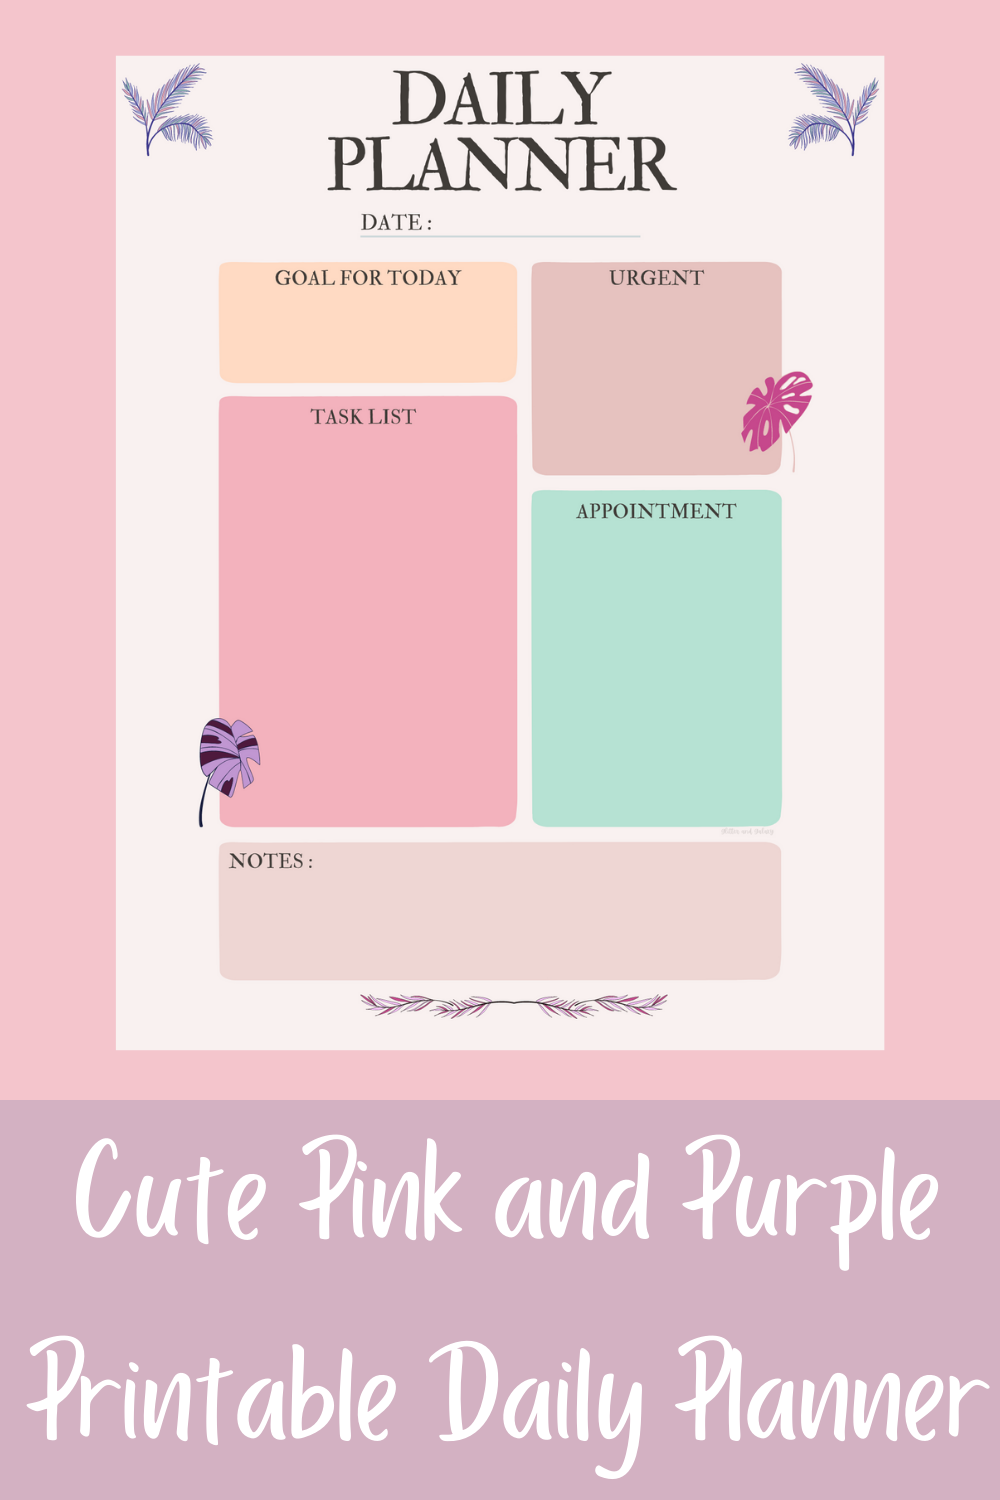 Cute Pink and Purple Printable Daily Planner pinterest image.